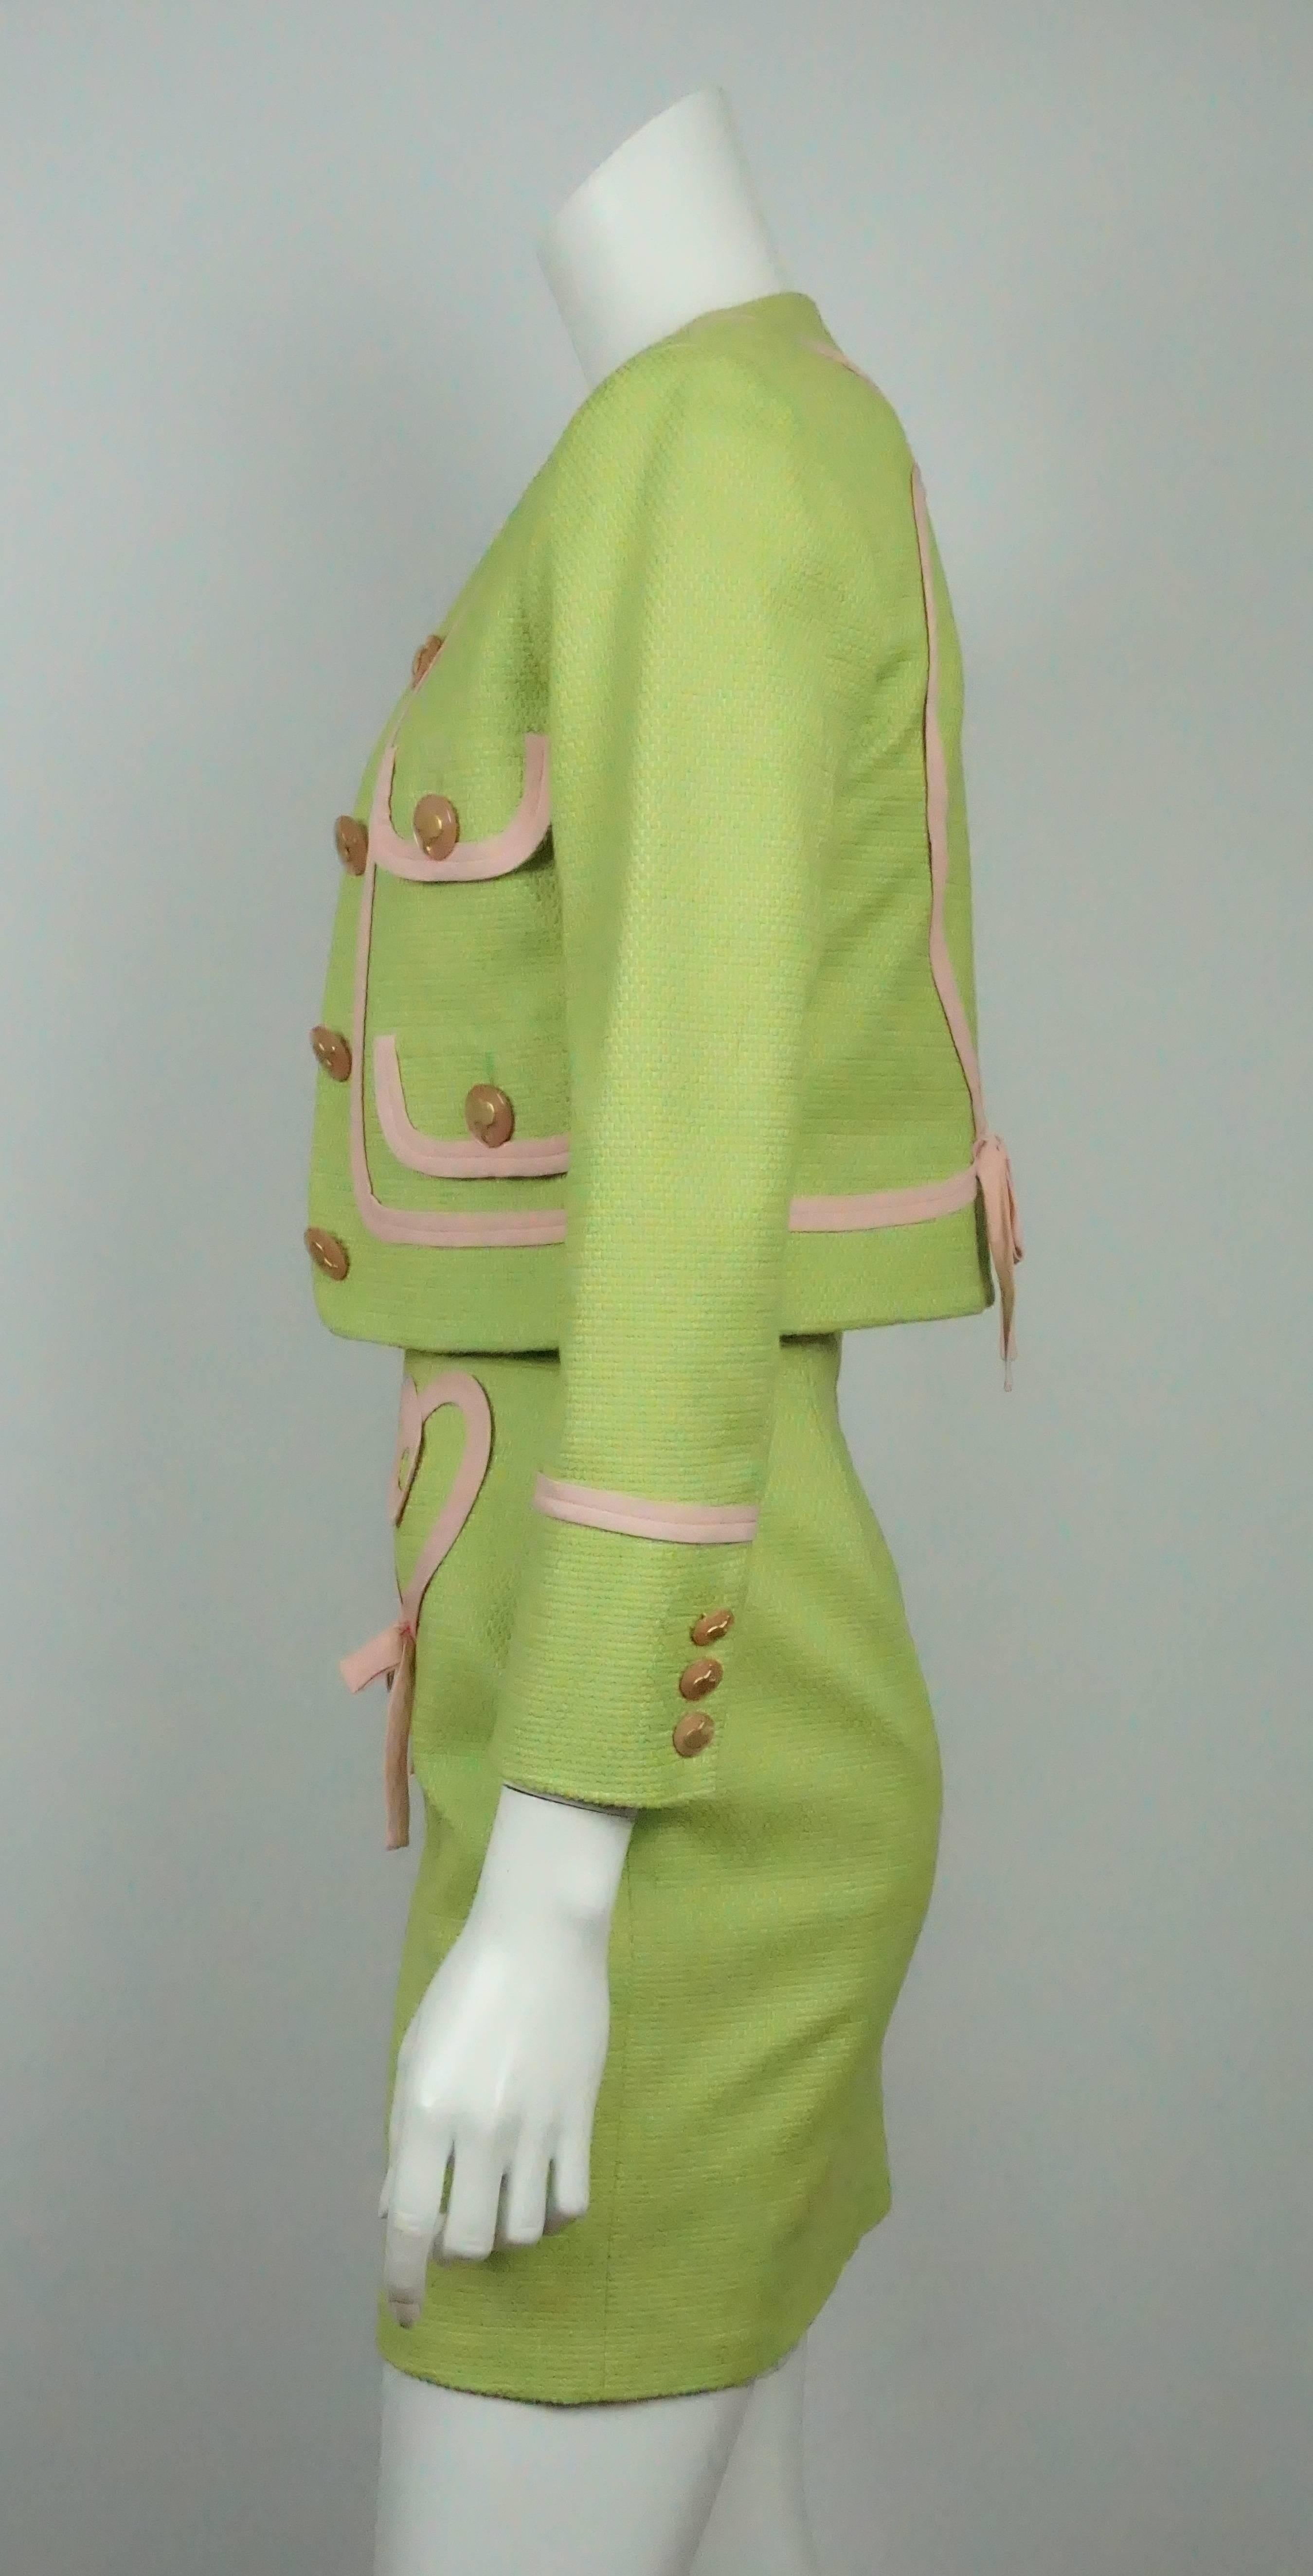 Moschino Cheap and Chic Jacket/Skirt/Top Lime Green Pique w/ Pink Silk Trim - 4  The entire unique three piece suit is in excellent condition. The jacket is made of green cotton pique and lined with rayon printed fabric. The jacket also has a bias